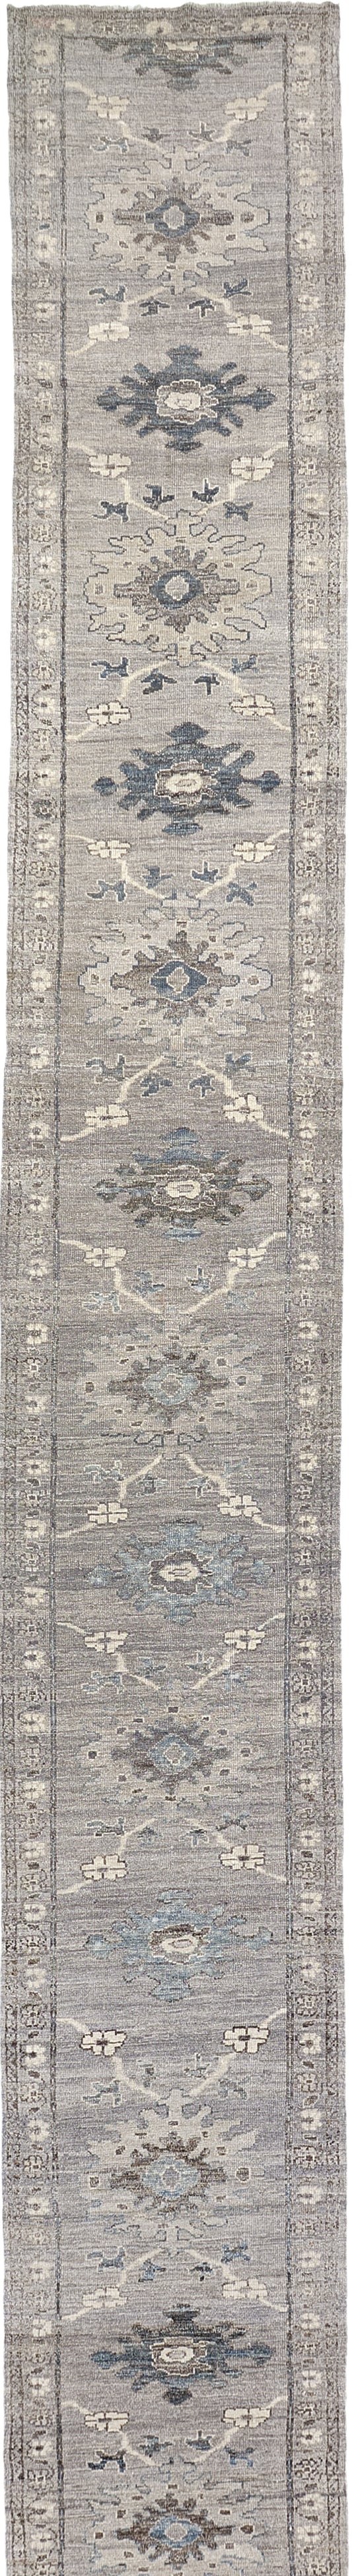 Oushak Runner, Sultanabad Collection